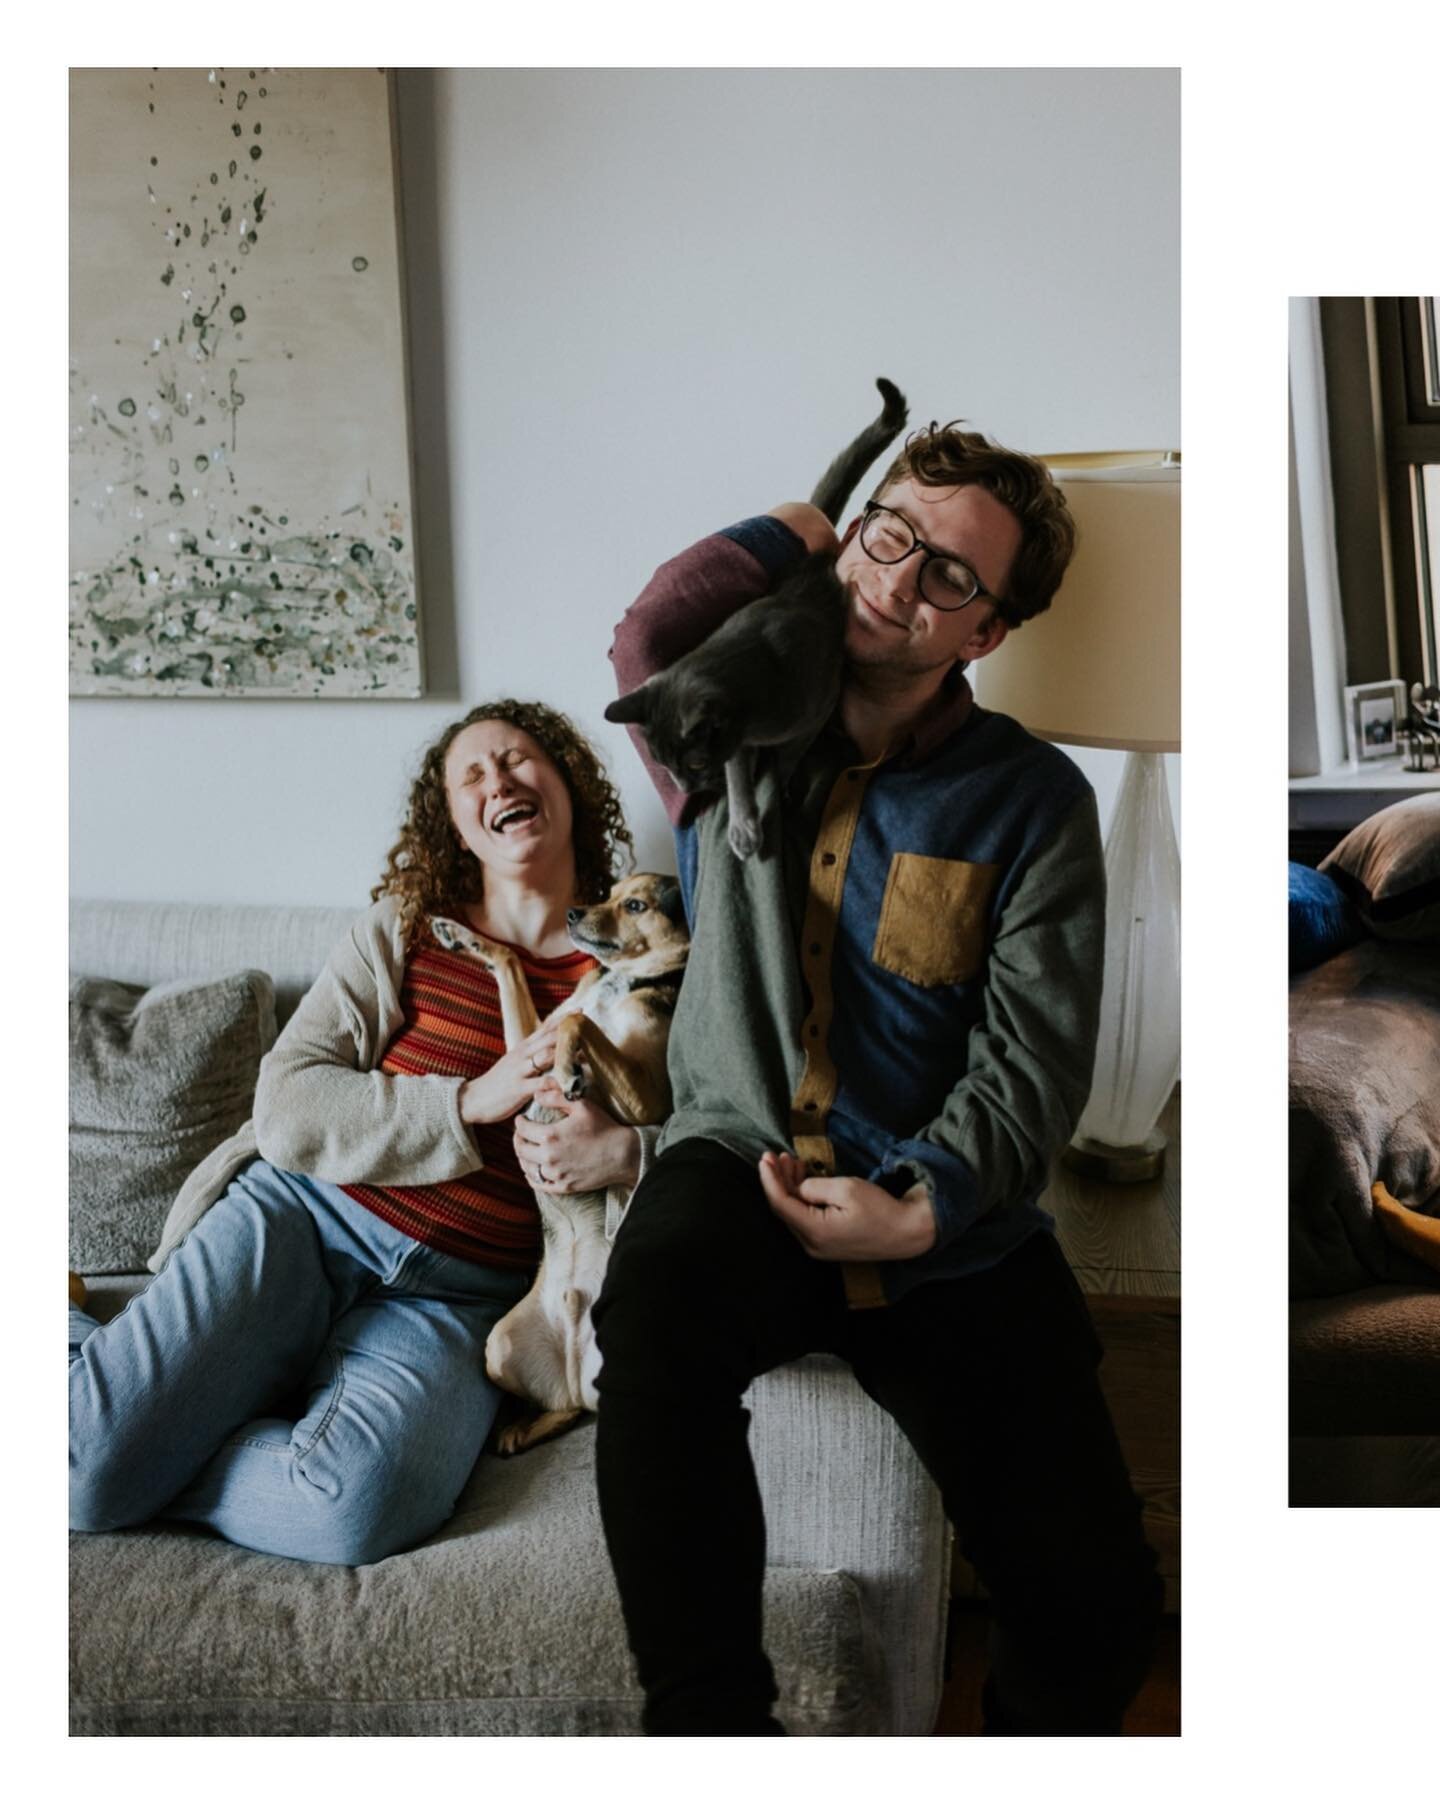 Was looking through engagement sessions from last year for Junebug Weddings and this session was the coziest of them all:) It was so beautiful to document Ryan and Chris in their space with their fur babies❤️
#brooklynengagementphotographer #nycengag